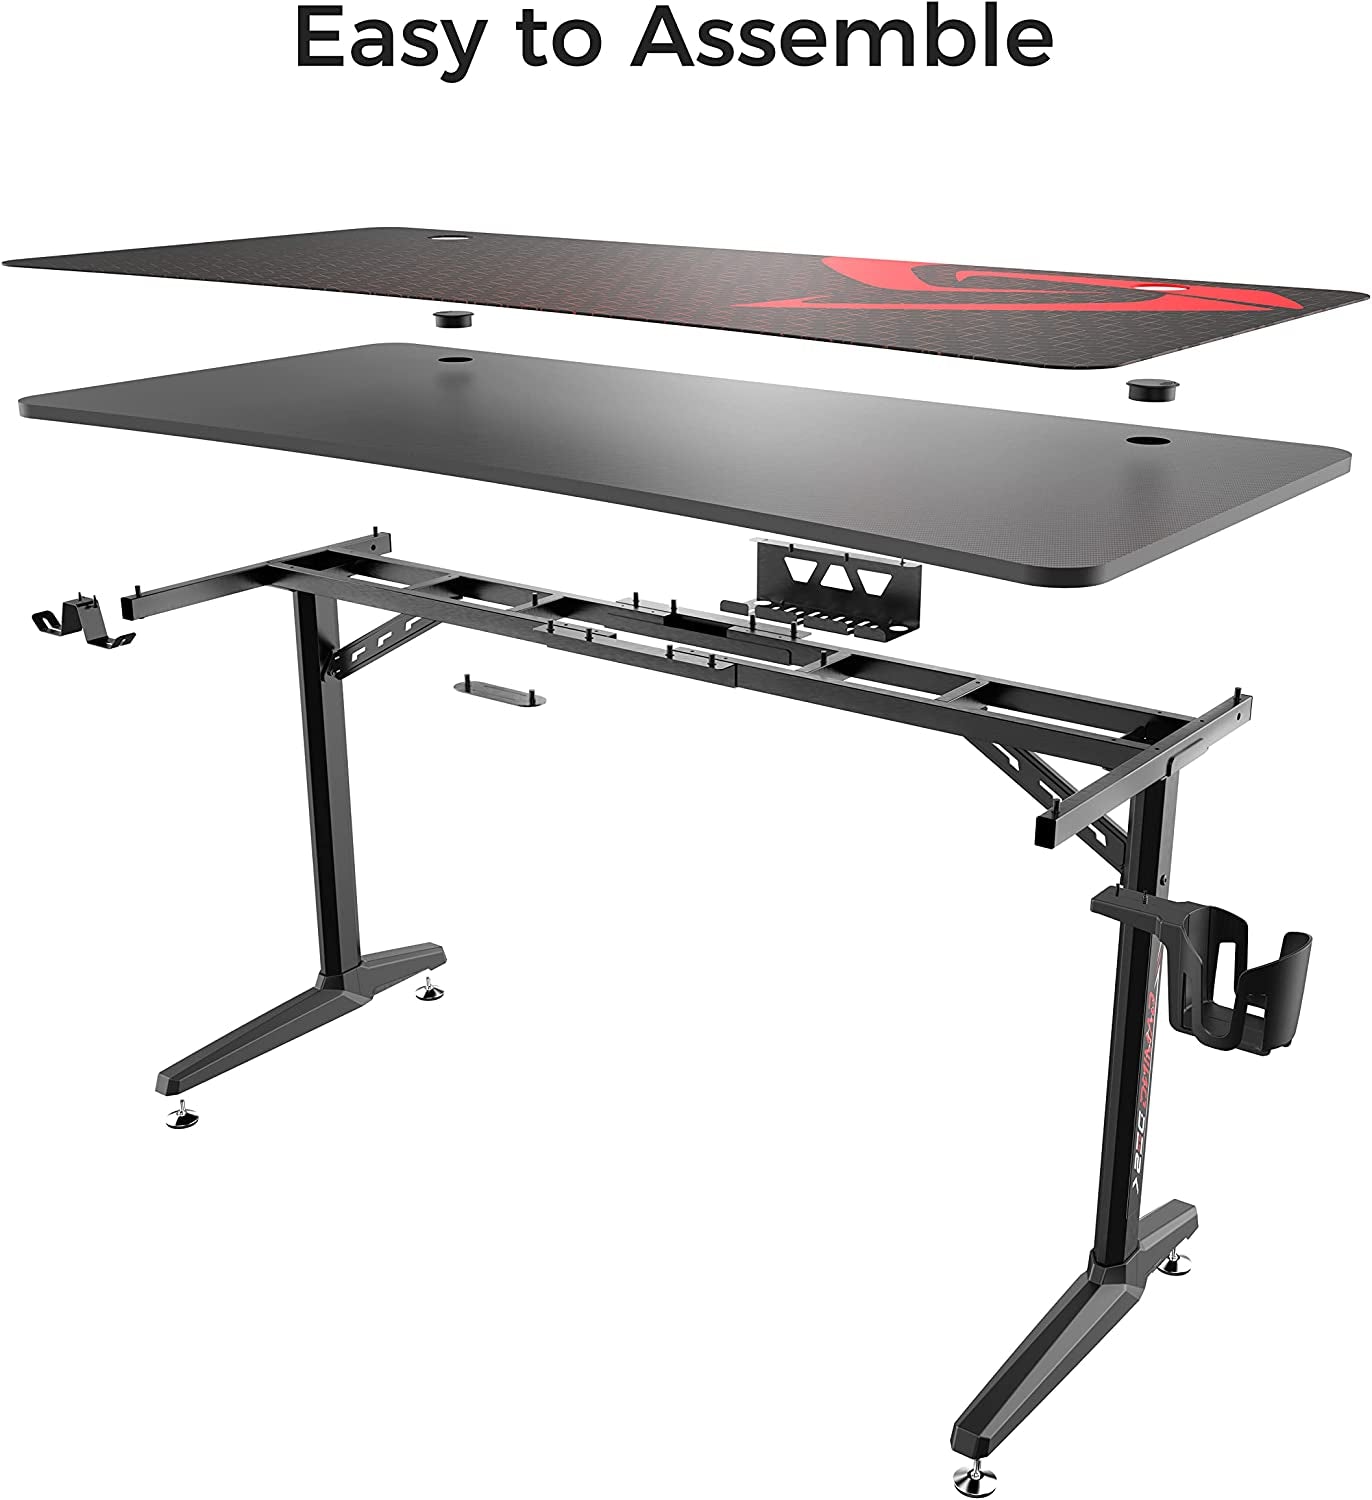 60 Inch Gaming Desk, Large Curved Computer Desk with Full Mouse Pad, T-Shaped Professional Gamer Studio Table for 3 Monitors with USB Handle Rack Cup Holder Headphone Hook, Carbon Fiber Black